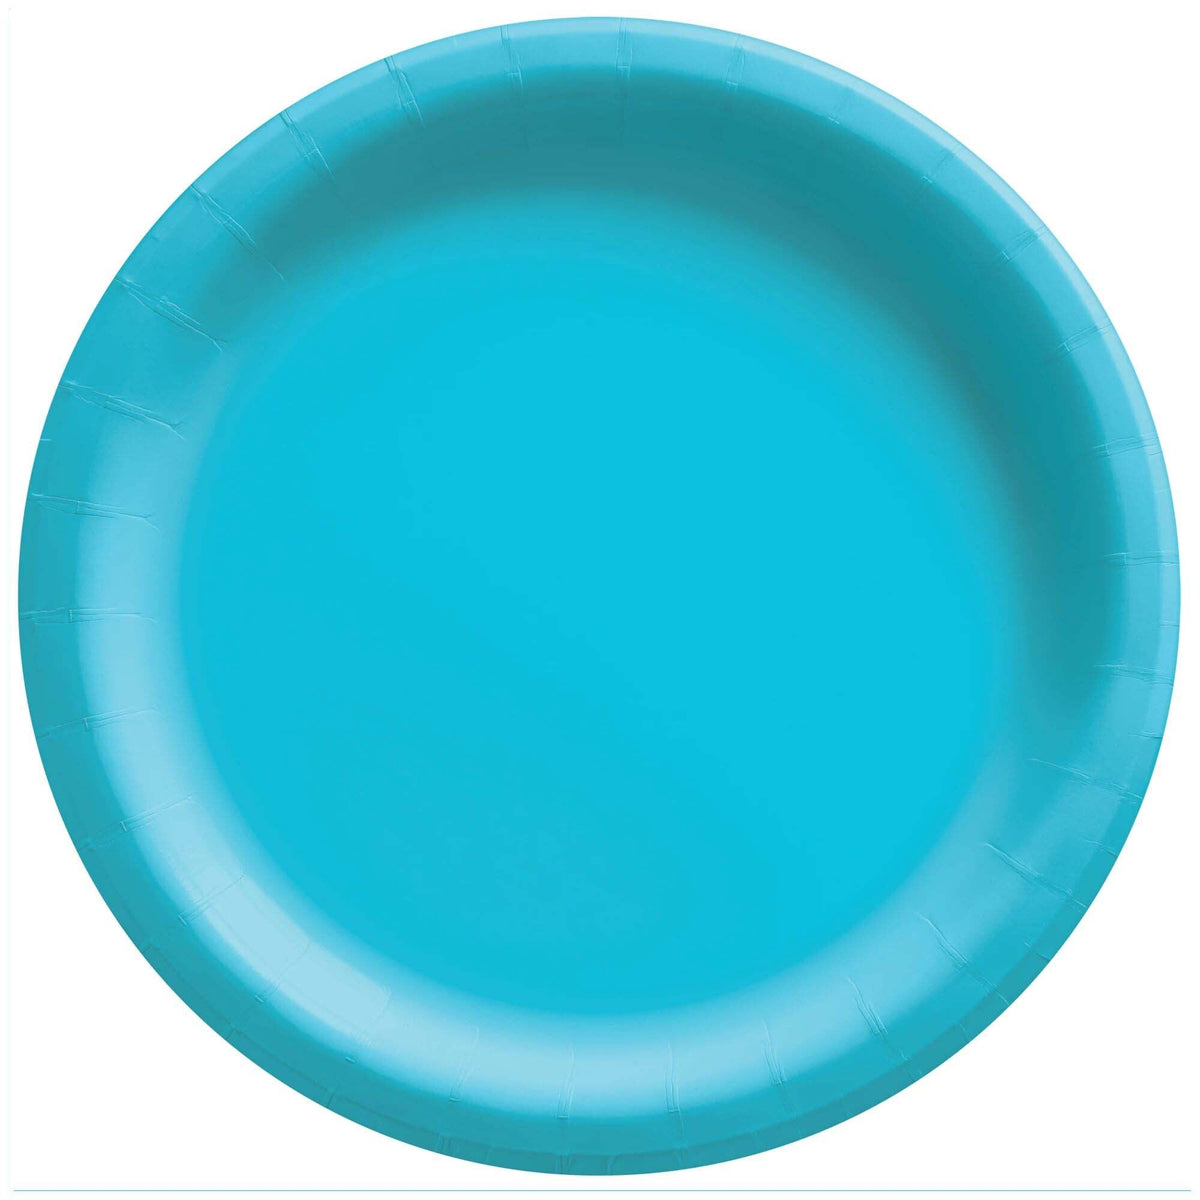 AMSCAN CA Disposable-Plasticware Caribbean Blue Round Paper Plates, 7 Inches, 20 Count 192937241400